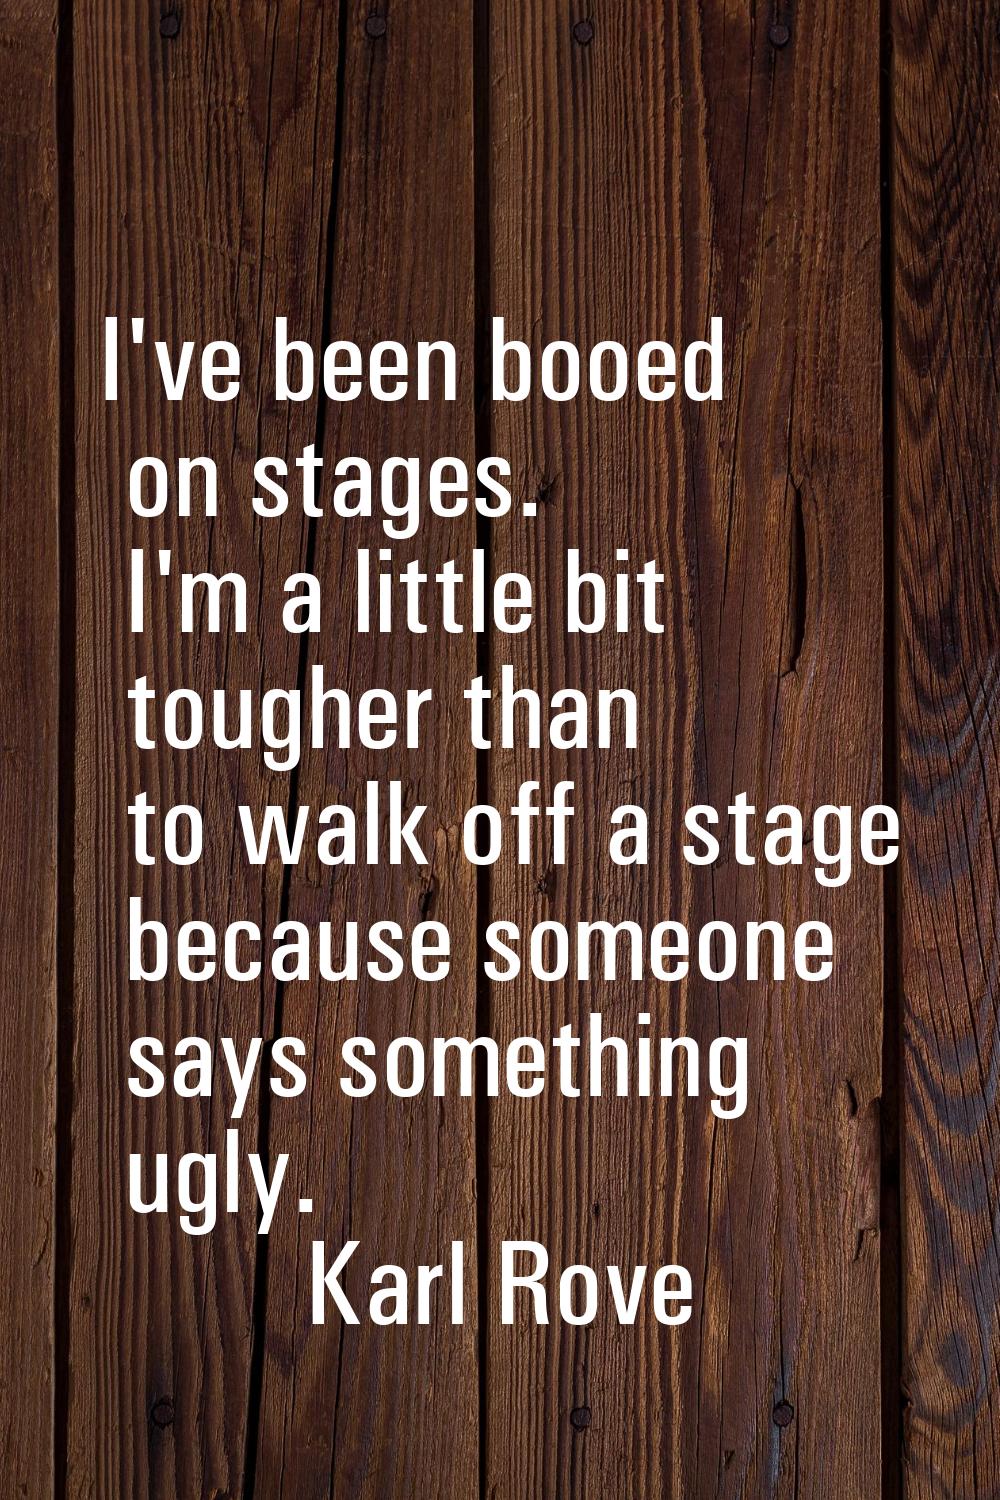 I've been booed on stages. I'm a little bit tougher than to walk off a stage because someone says s